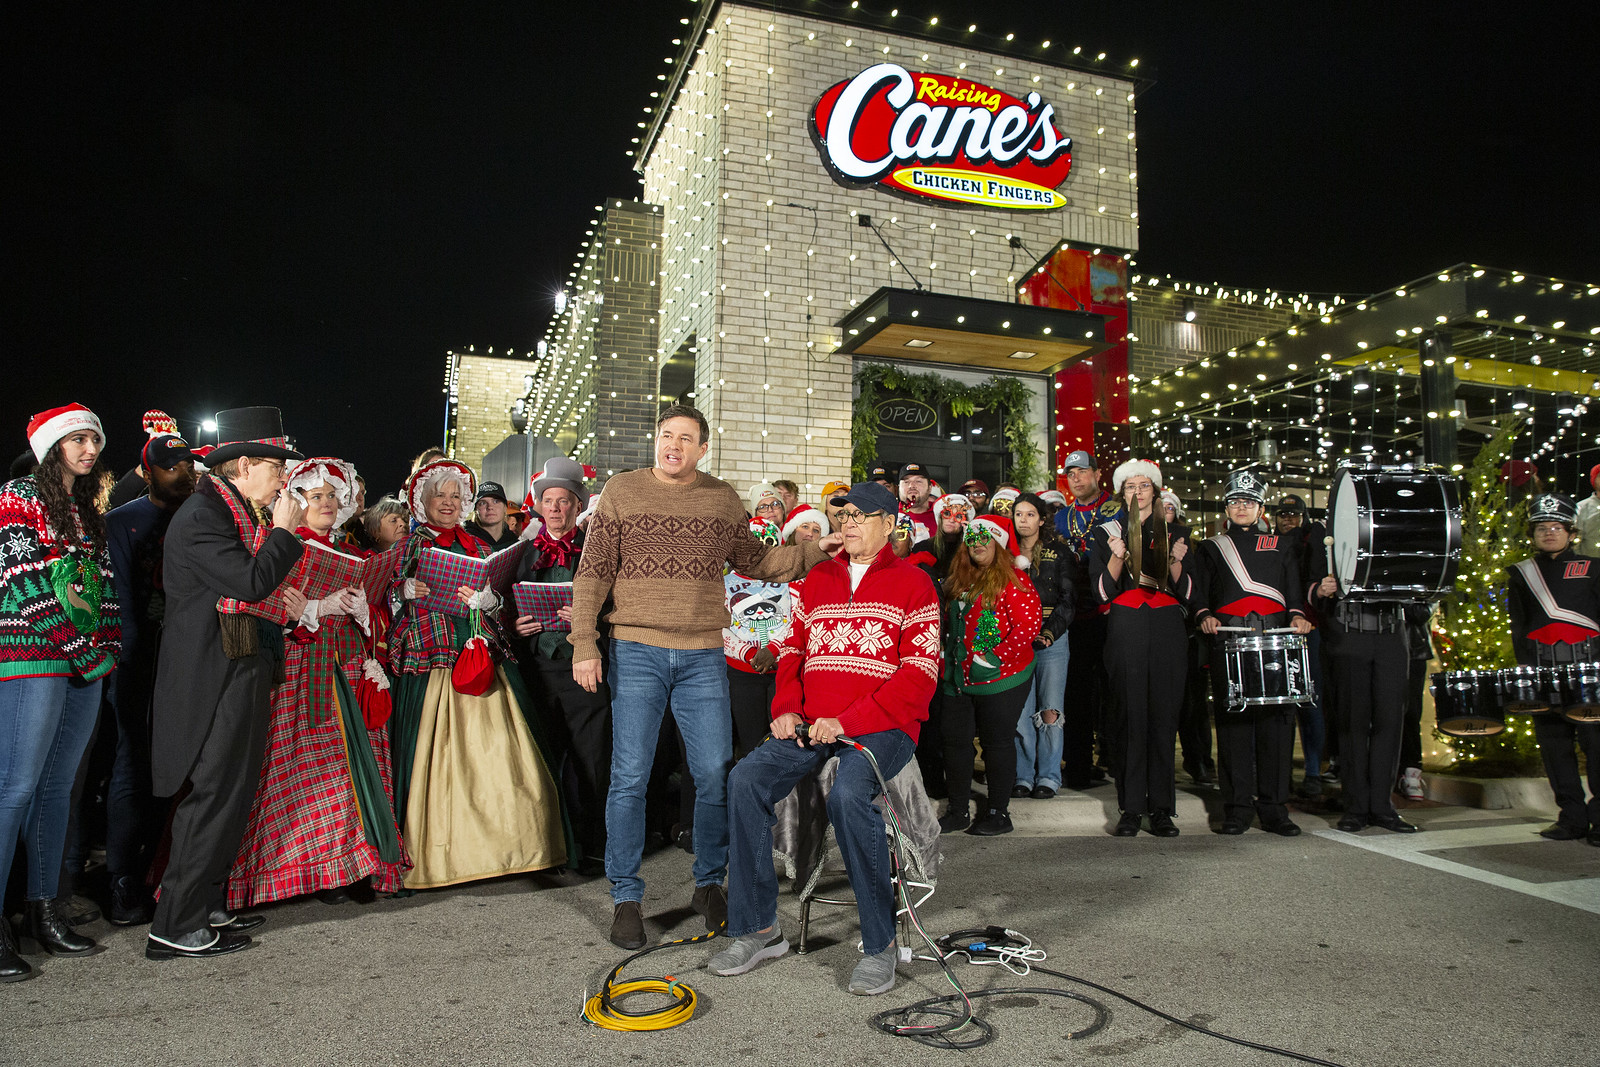 Two men in sweaters perform a scene in front of a group of people dressed in Christmas Carol outfits. They are outside of a Raising Cane’s restaurant.